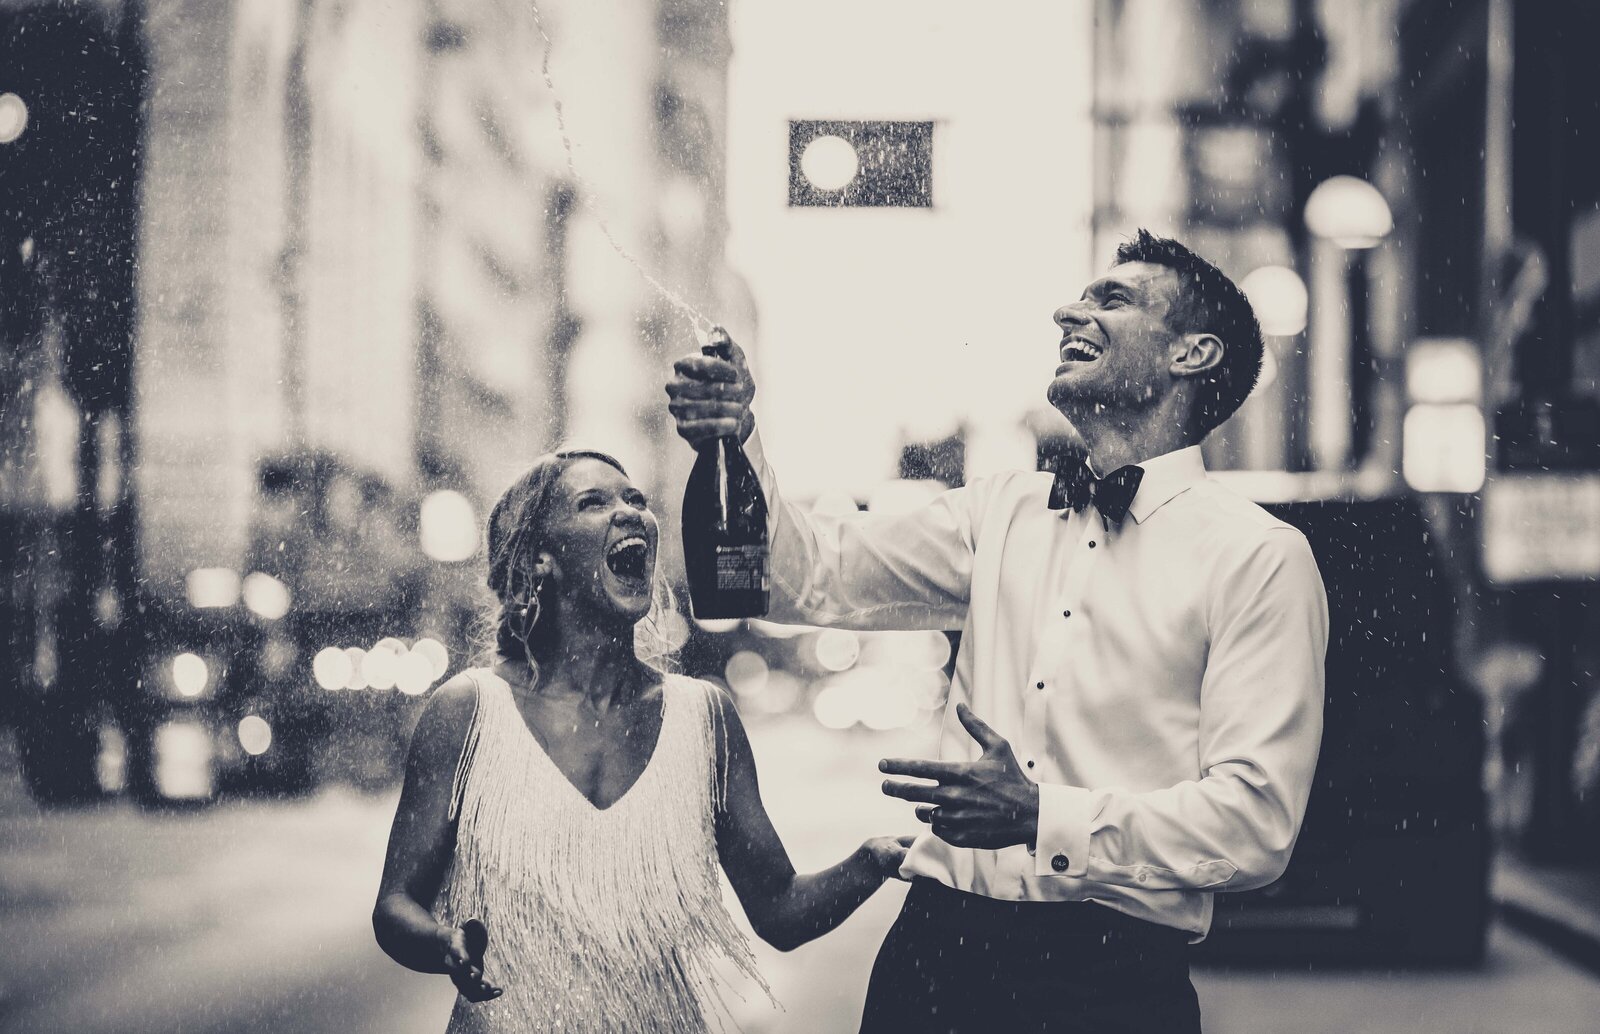 Feel the excitement of Hailey and Peter's wedding celebration with this vibrant photo capturing a joyful champagne pop in the bustling streets in front of the Renaissance. The energy of the moment is palpable as champagne sprays into the air, symbolizing the start of their new life together amidst the urban backdrop. Perfect for couples seeking dynamic, lively wedding photos that capture the essence of celebration, this image showcases how even traditional elements like a champagne toast can be transformed into a unique and memorable event.